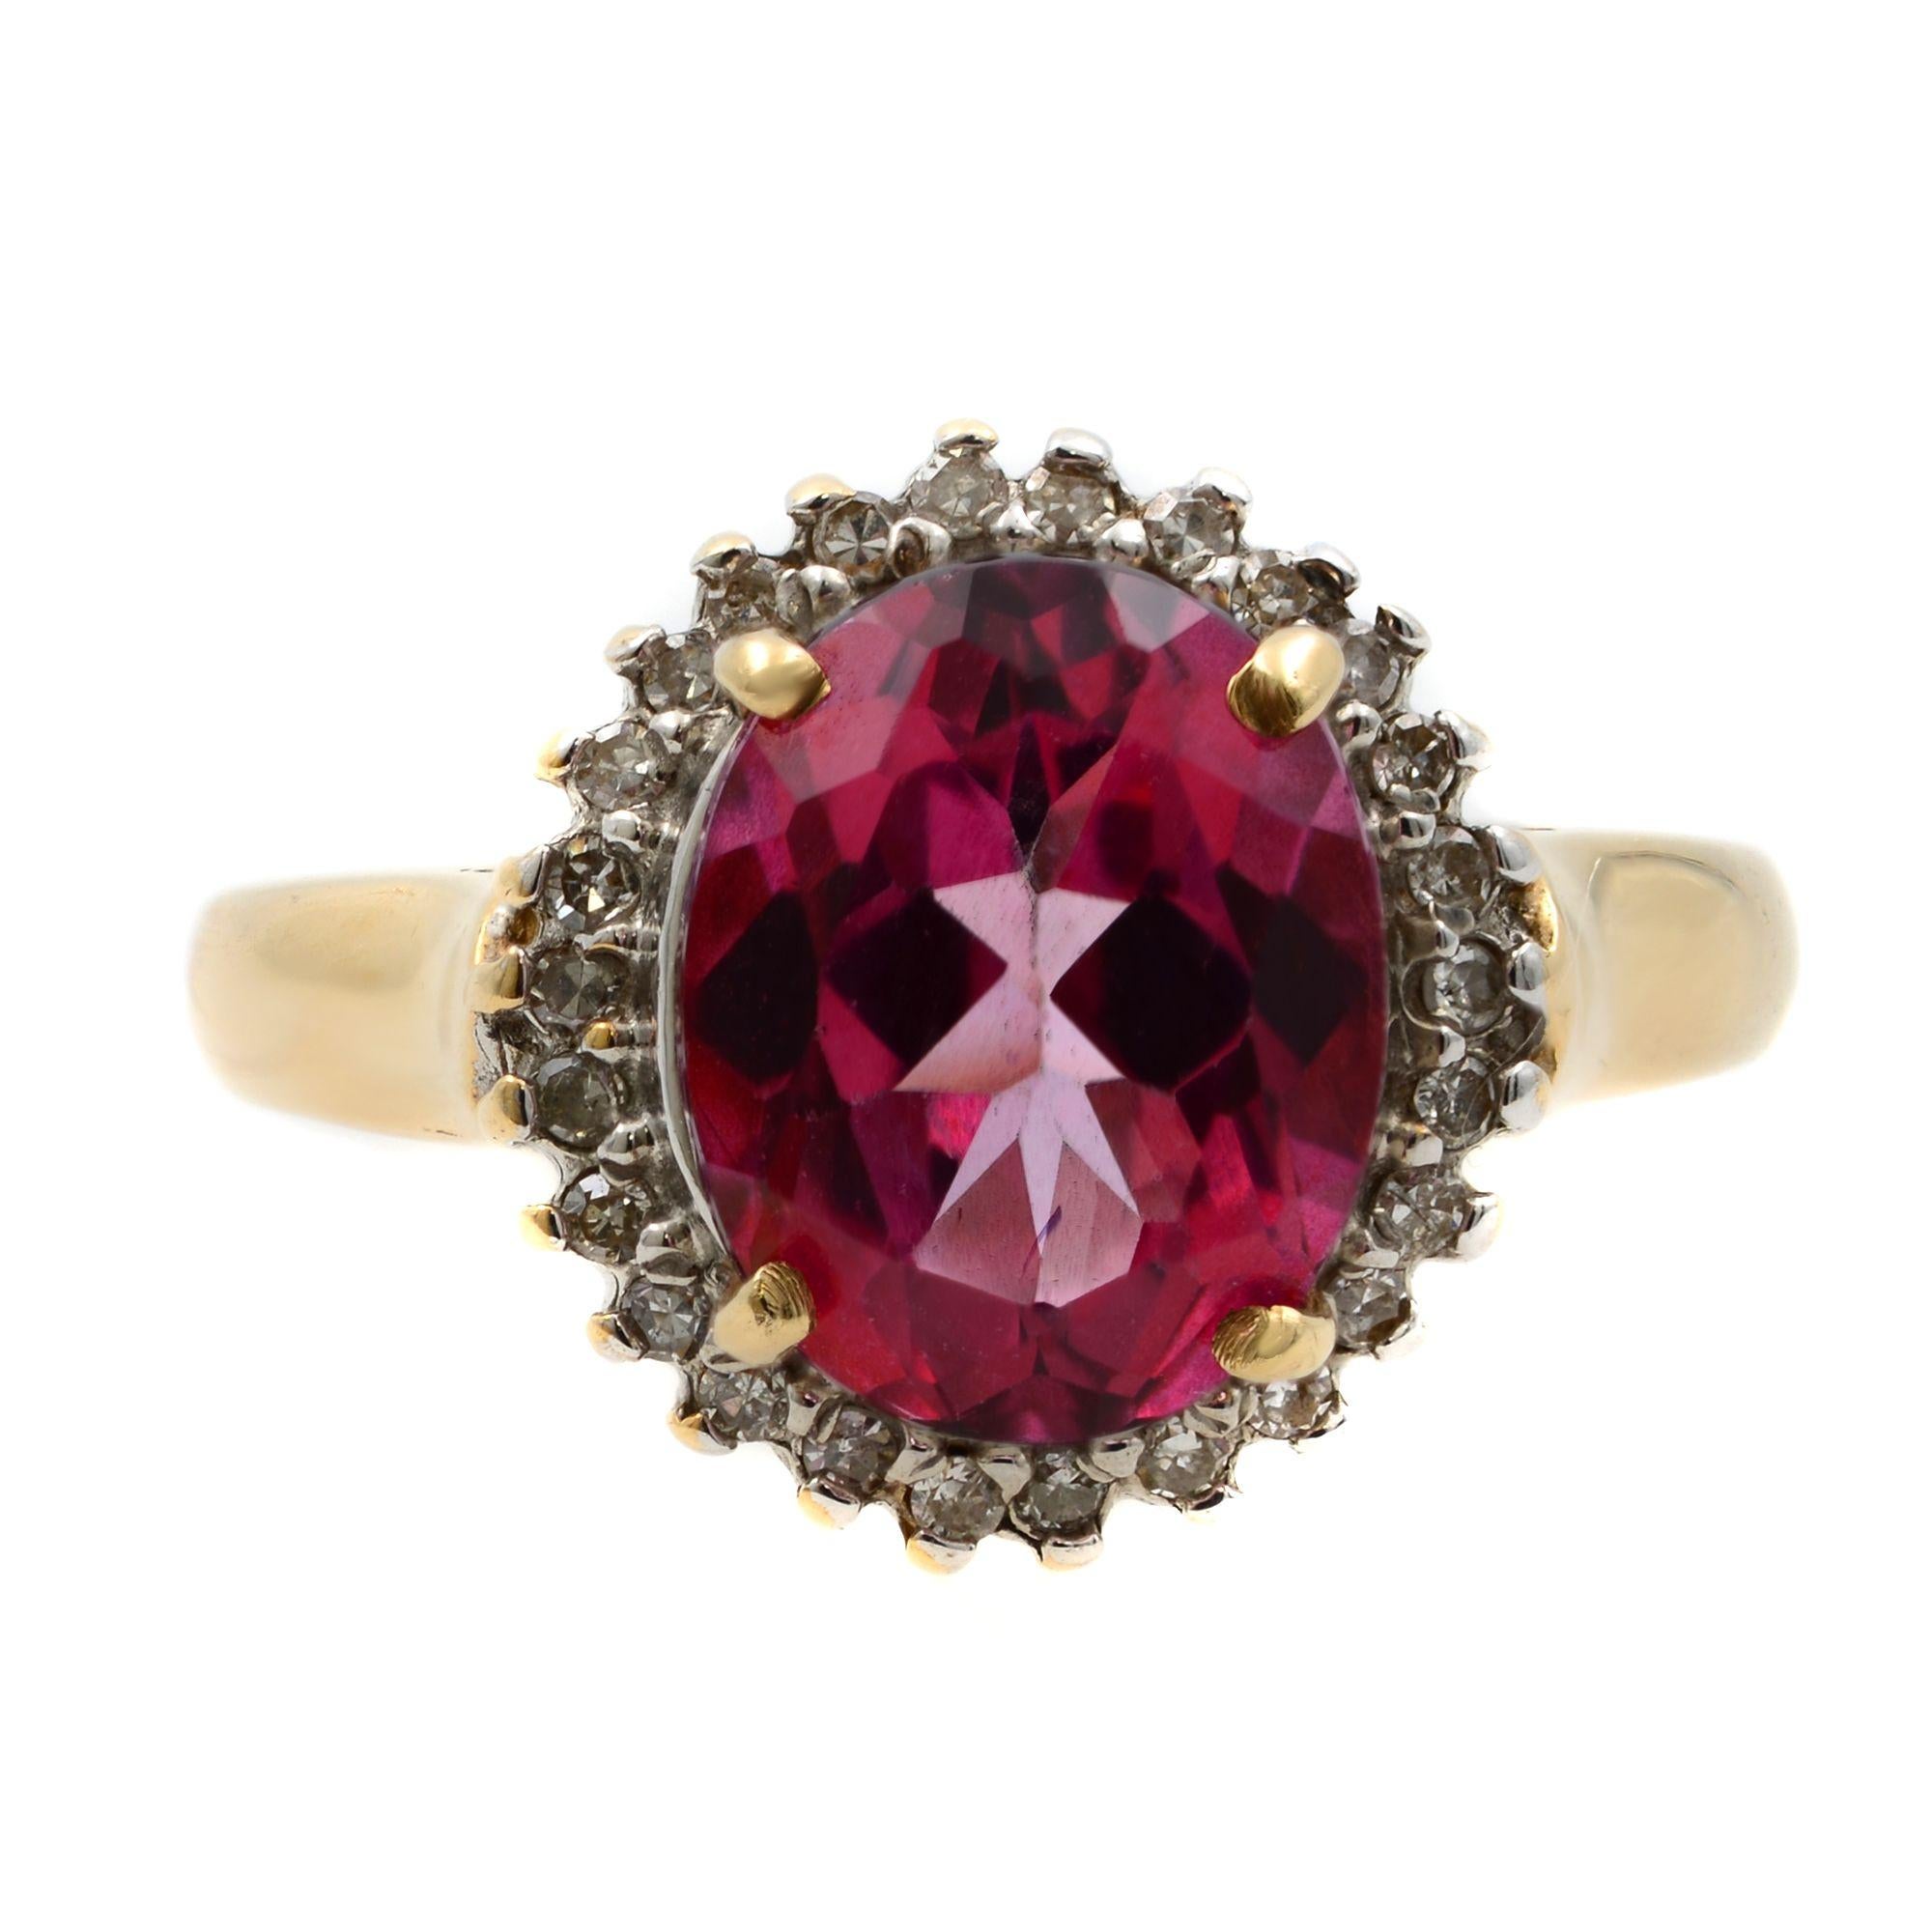 The design of this beautiful pink tourmaline ring is unique statement and her beautiful engagement ring. A radiating 3.00 carat oval pink tourmaline sits majestically at the core while the dazzling diamonds accentuate its beauty. The diamonds are in